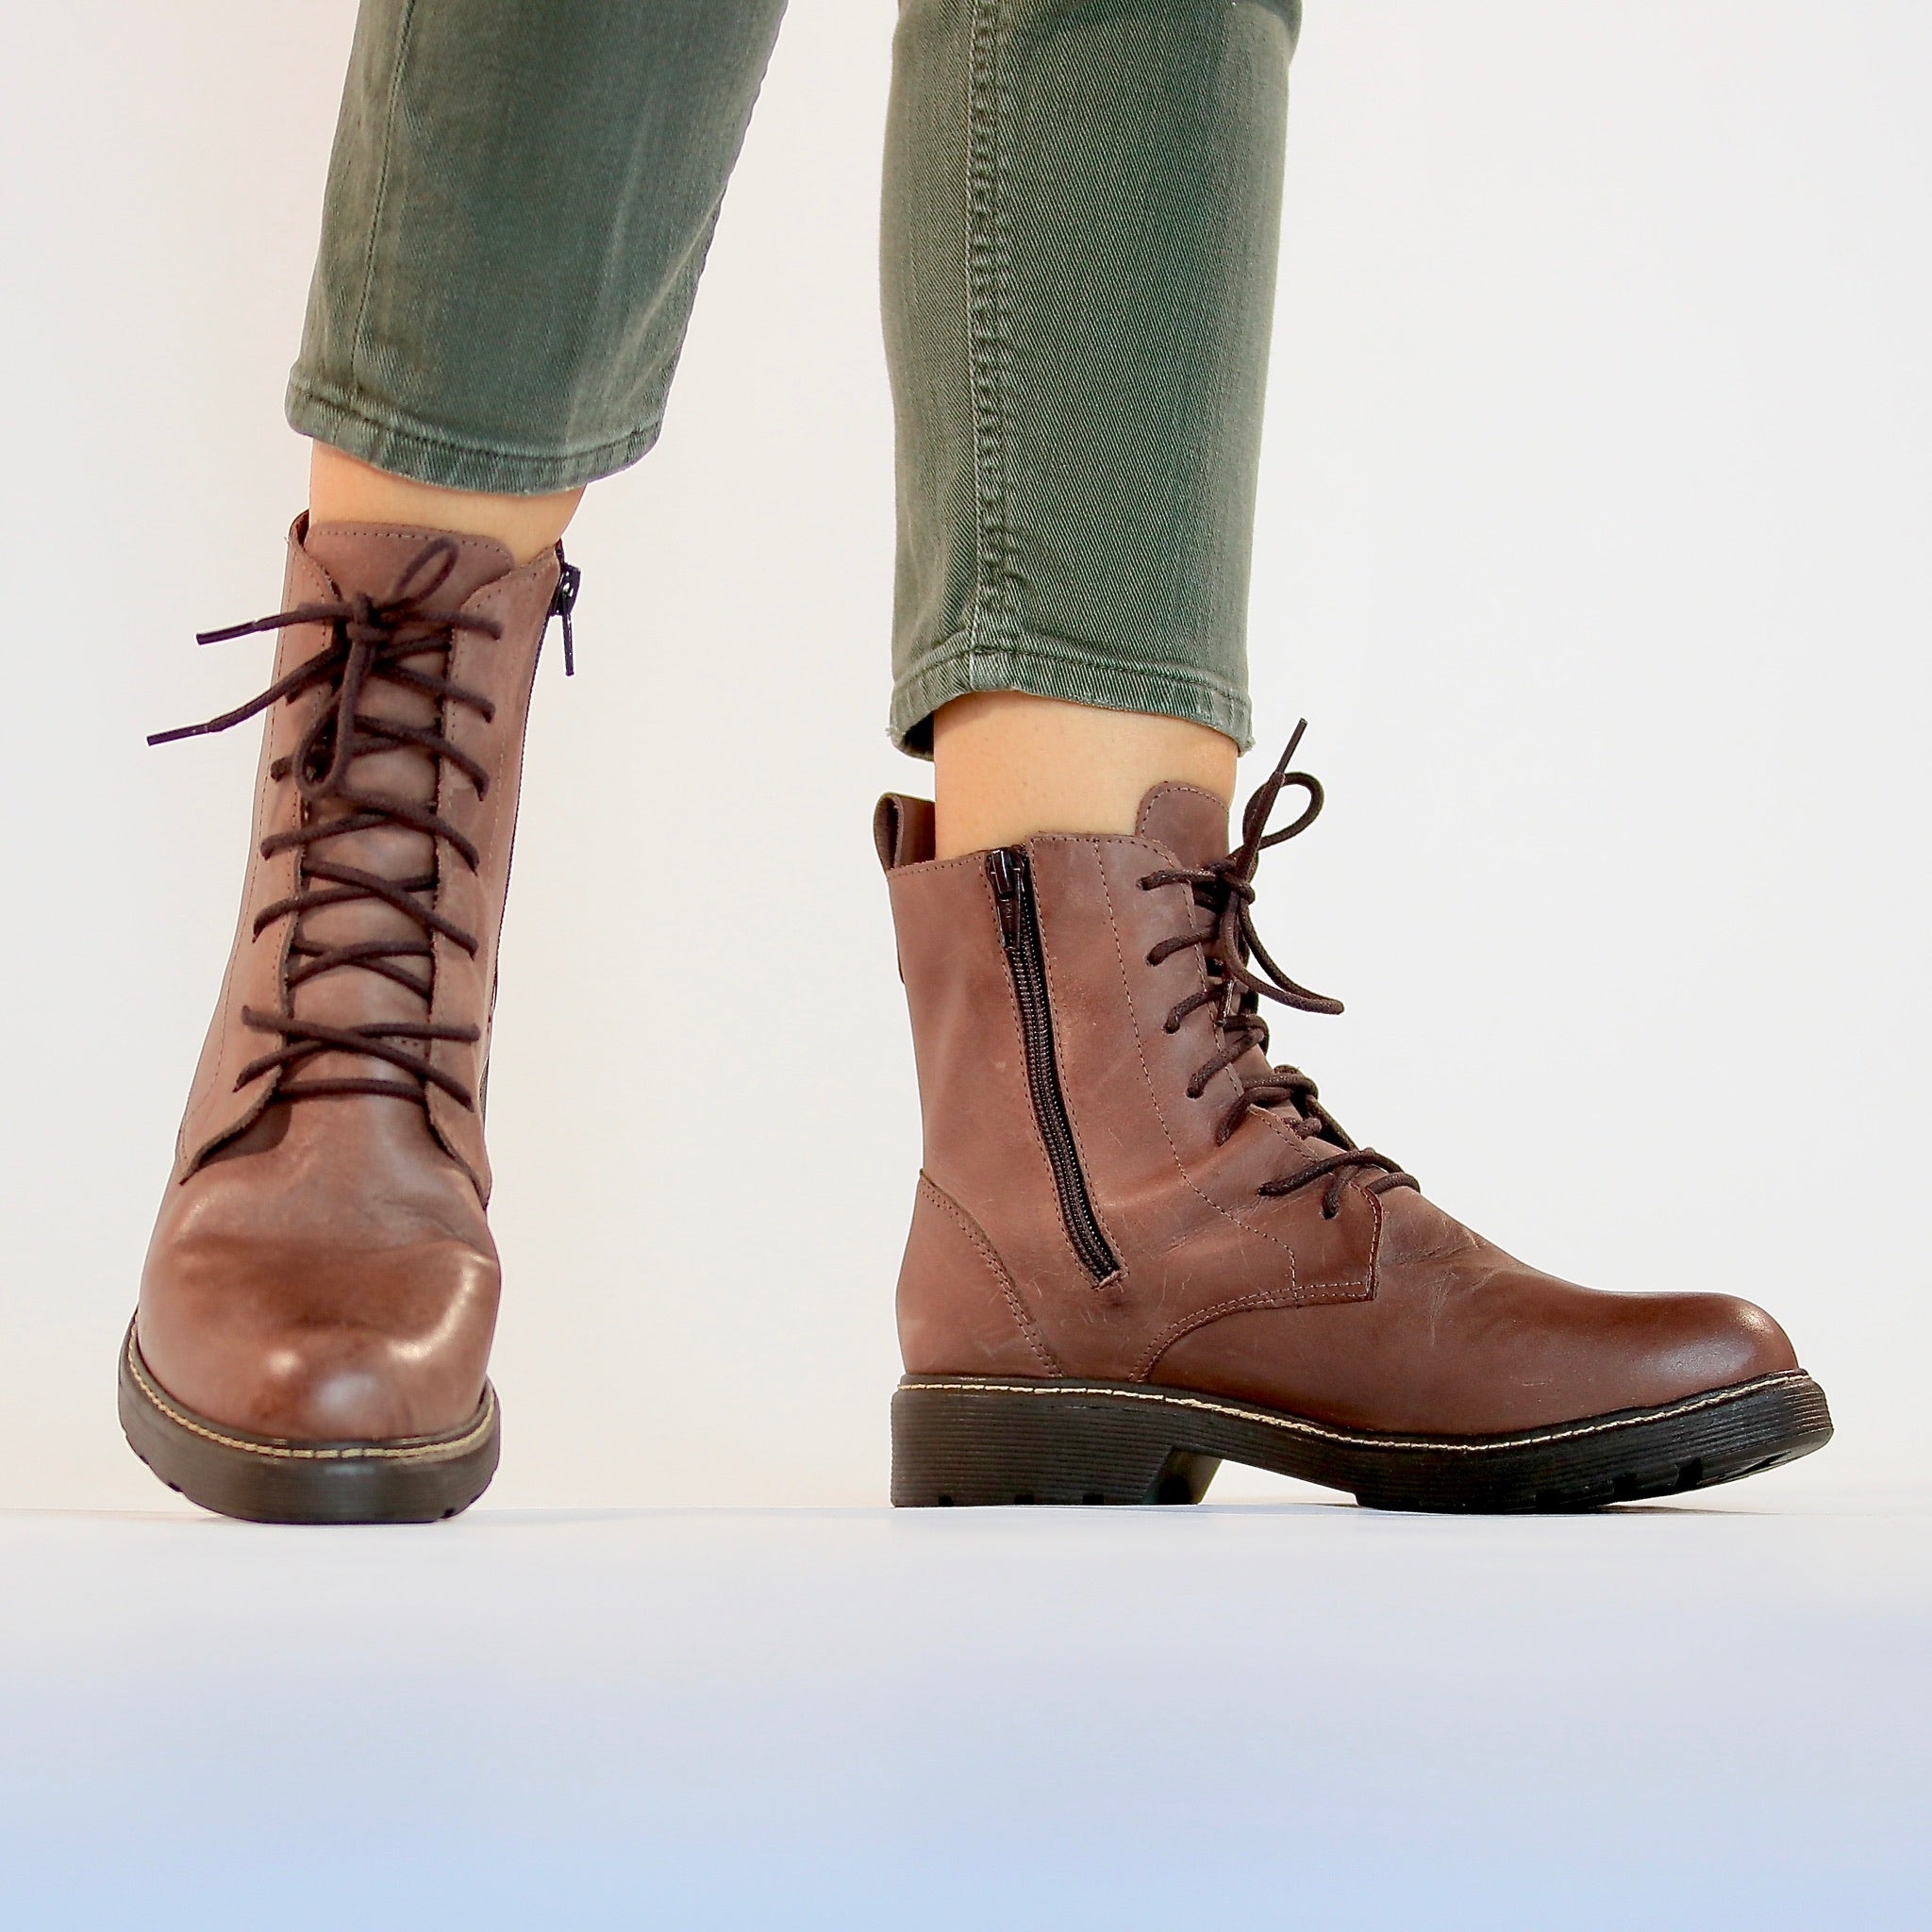 Women's Chocolate Brown Combat Boots by 